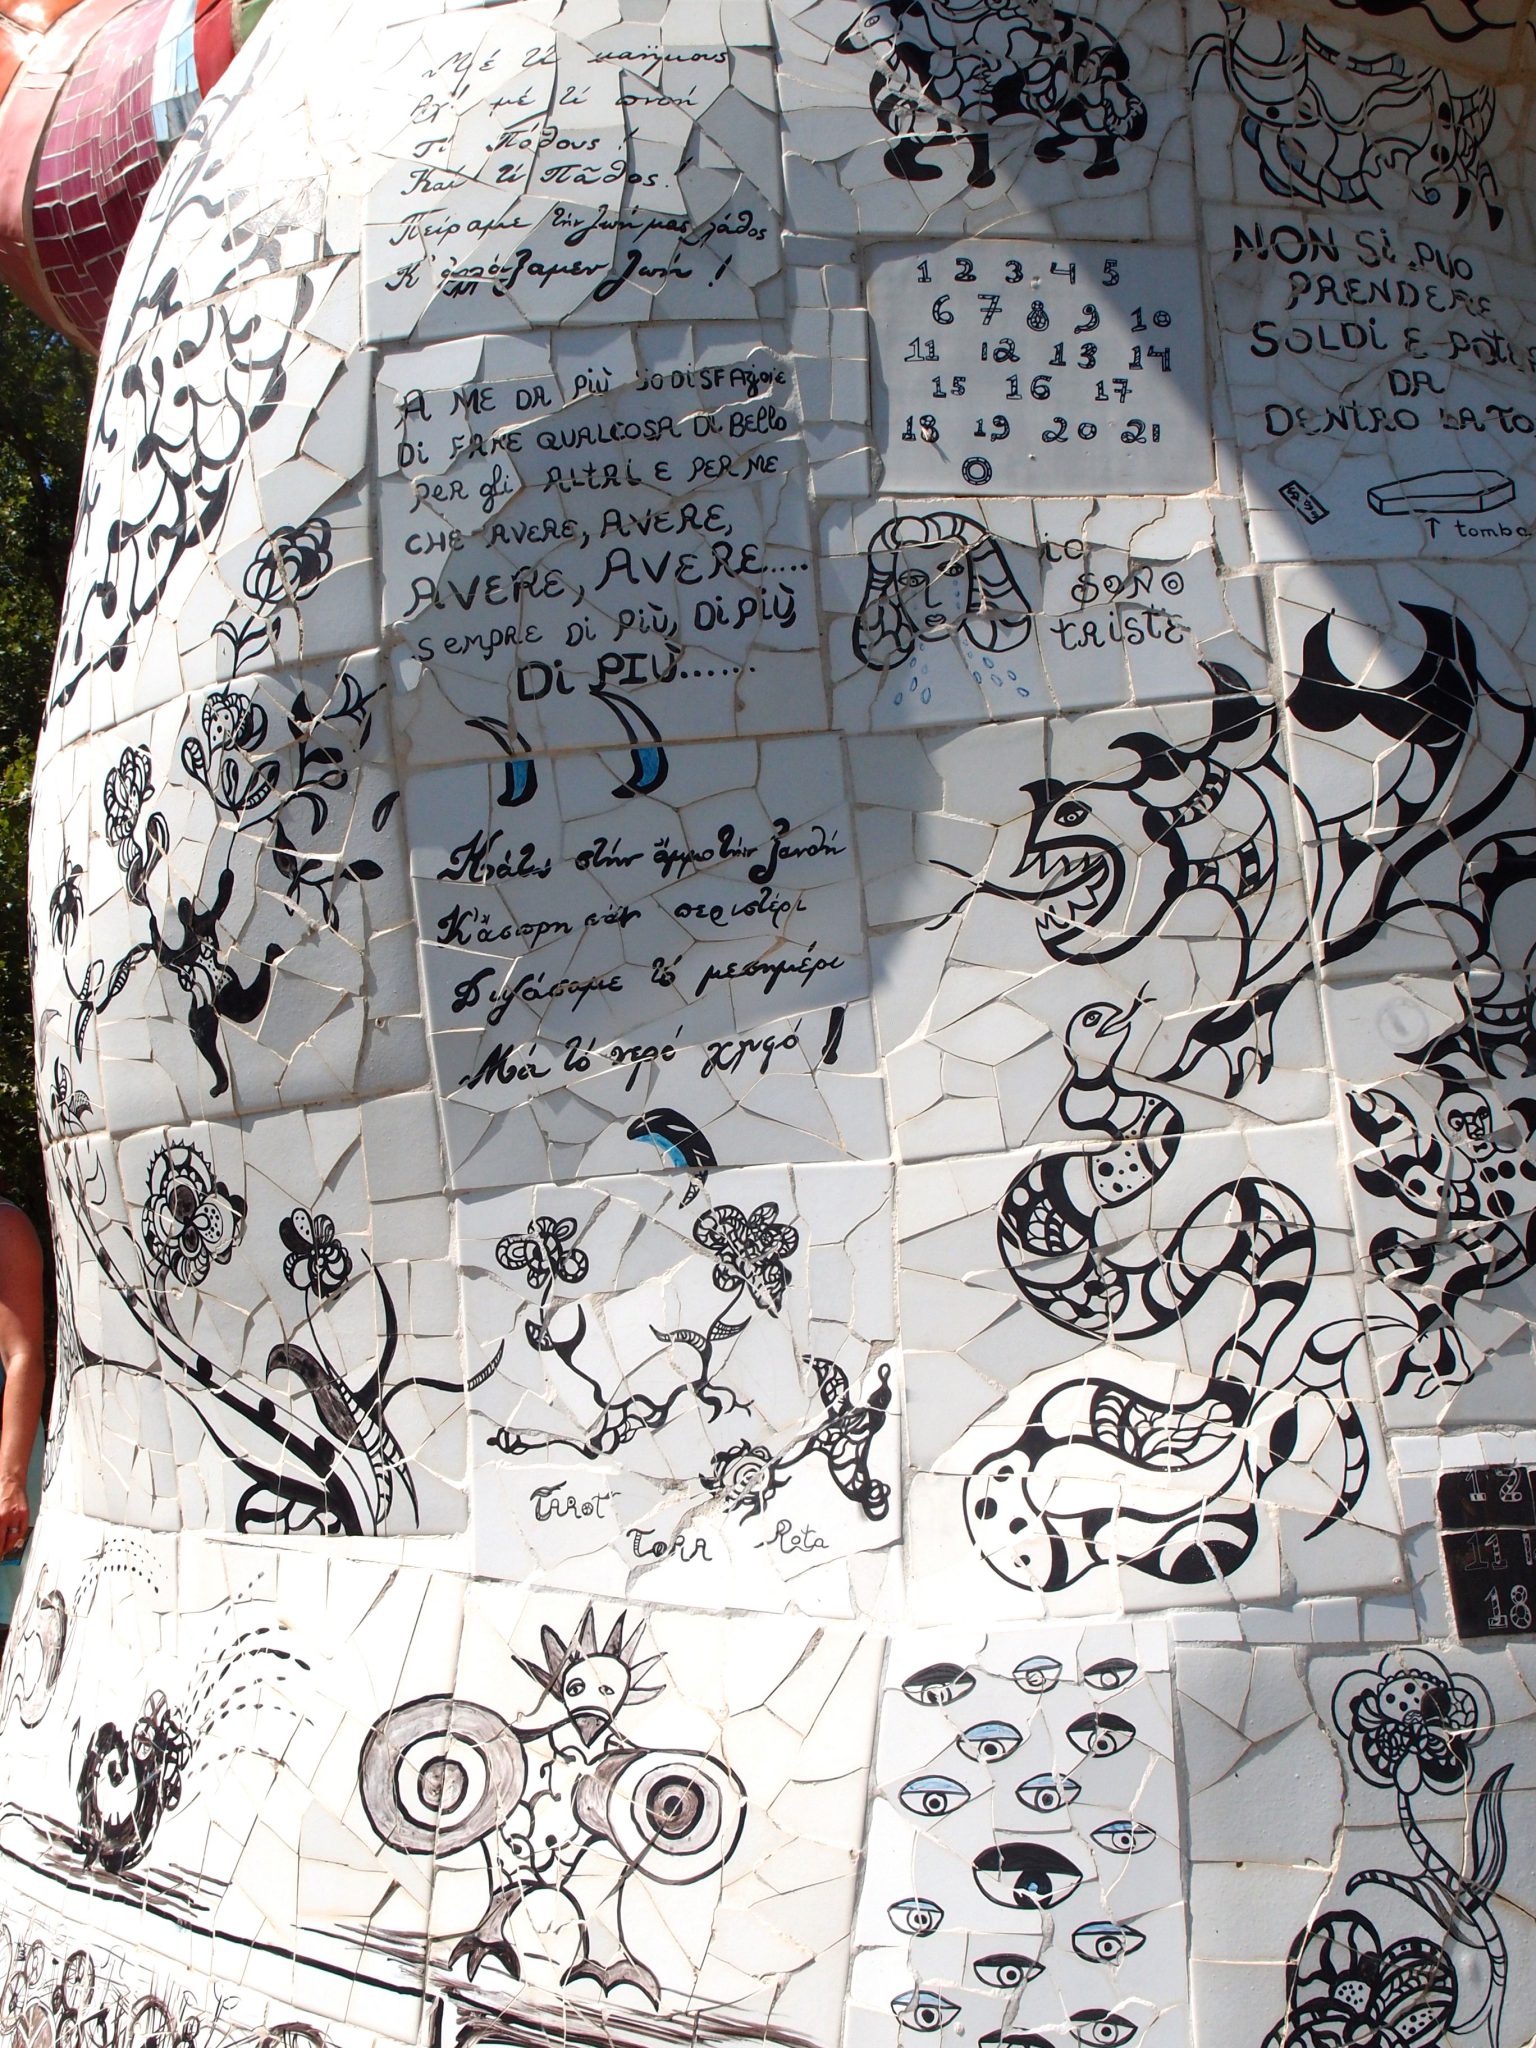 Detail of exterior of the Tree of Life. The tiles on the outside of this structure are densely covered with Niki’s scrawls. Translated, they’re a timeline of a love affair, which ends in heartbreak. With drawings and these words, Niki begins: “I would like to give you everything, my mouth, my money, my imagination, my breast, my time, my terrific cooking, my everything.” Many tiles later, she writes “What shall I do now that you’ve left me? Will I cry a million tears? Will I die? Will I take to drink? Take a trip? Will I consult the stars and a crystal ball on how to win you back? Will we stay friends?” 